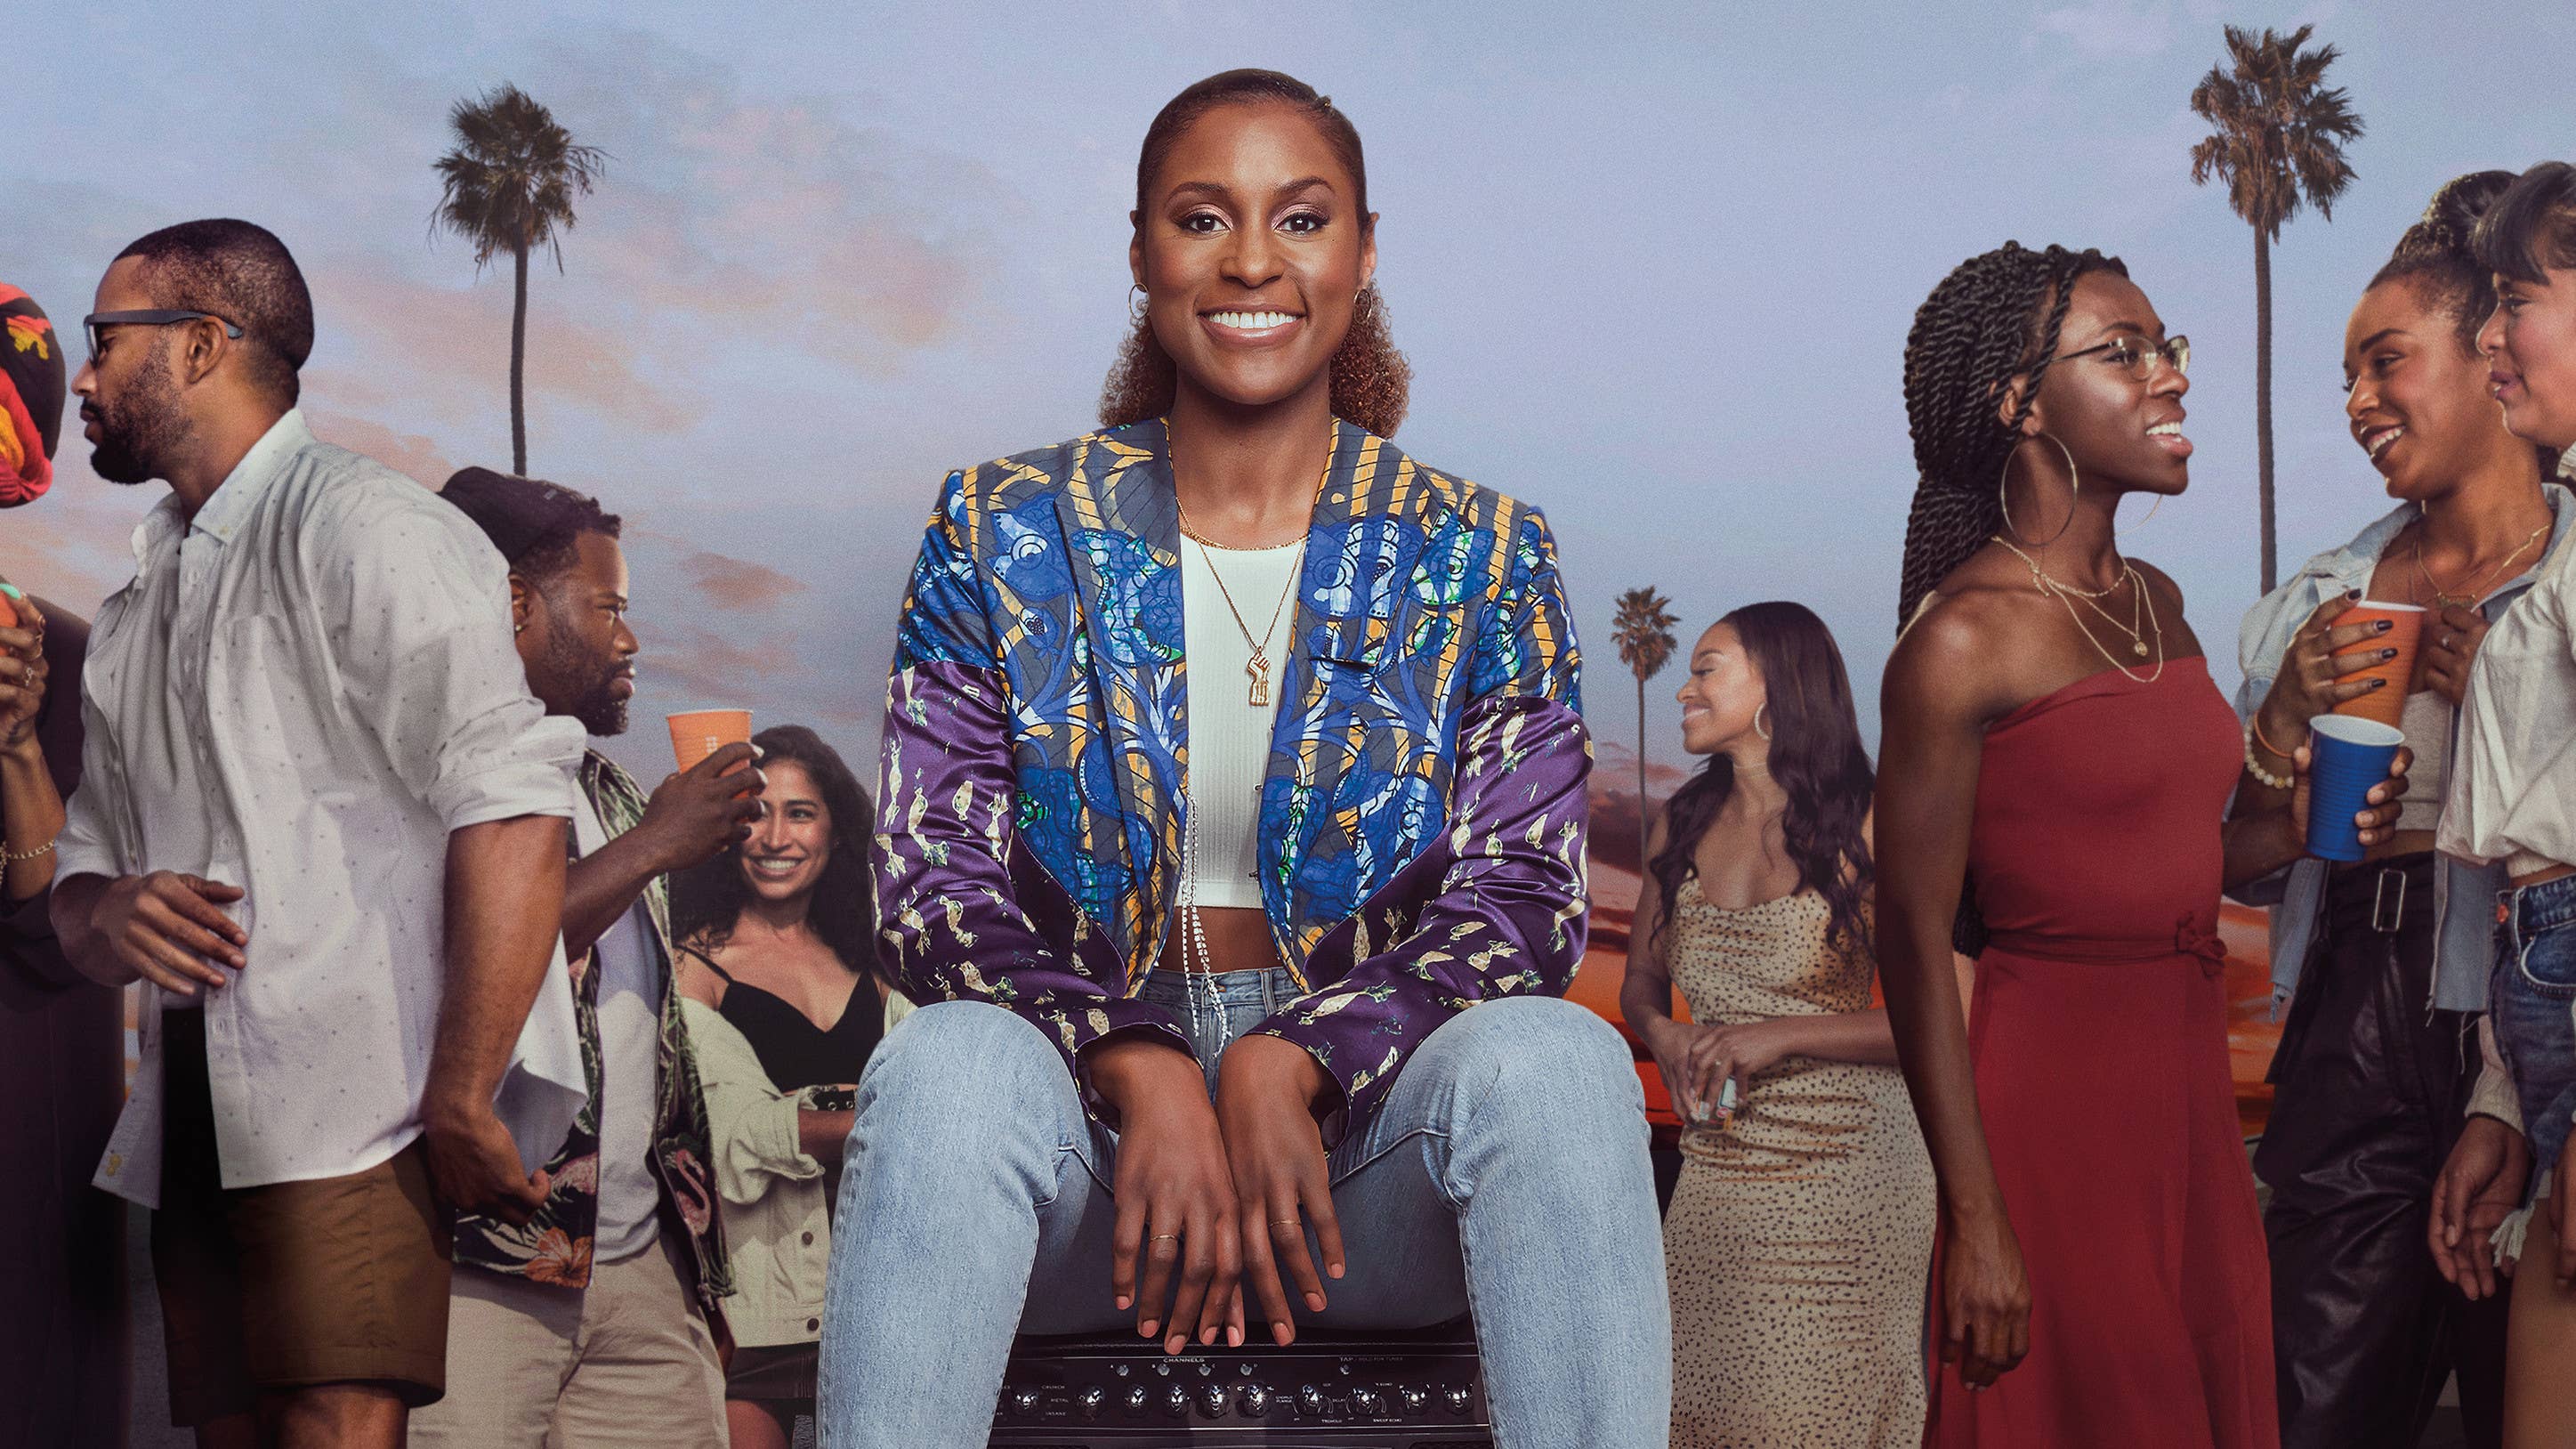 HBO Max Gives Black Women A Platform to Shine, série hbomax